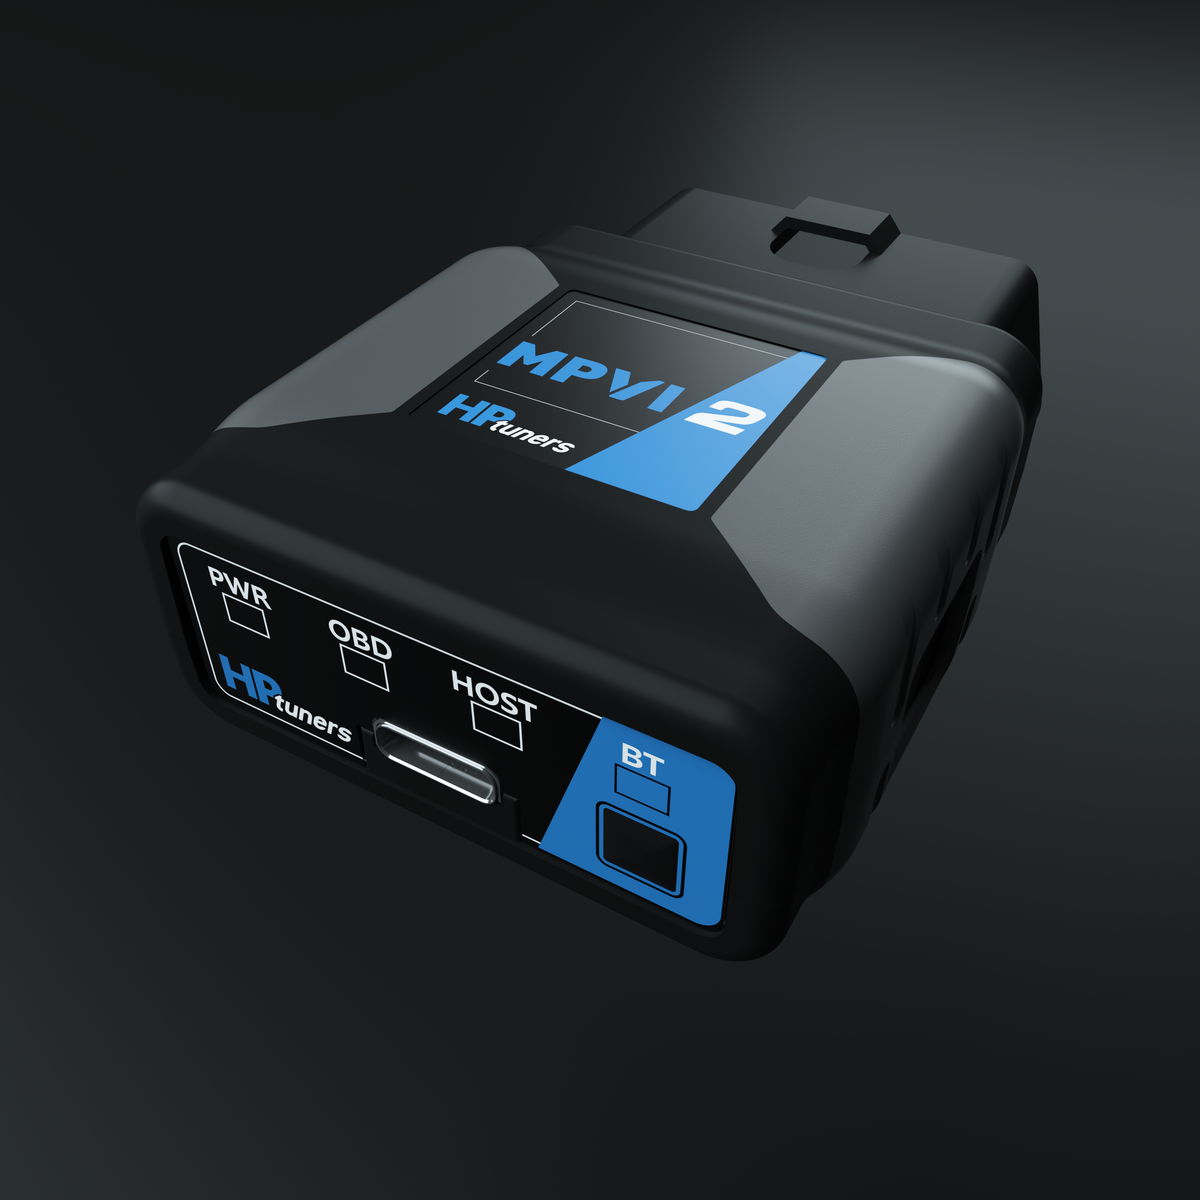 HP Tuners MPVI2 Plus with Pro Link and 2 Credits, the latest generation of hardware from HP Tuners, Replaces VCM Suite